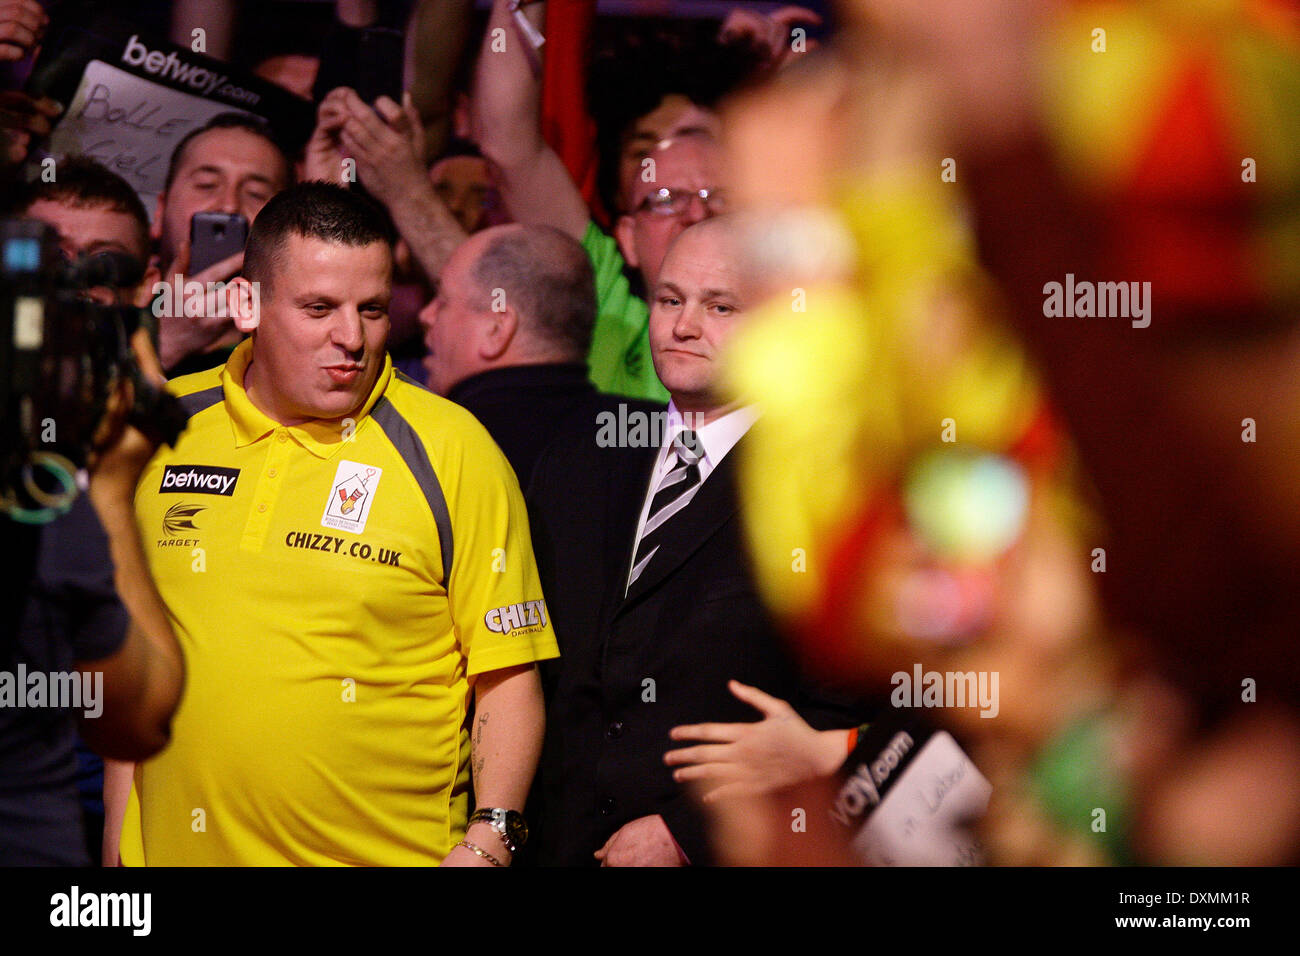 27.03.2014, Dublin Ireland, Dave Chisnall in action against Adrian Lewis PDC Darts Premier League from the O2 Arena, Dublin, Ireland Stock Photo